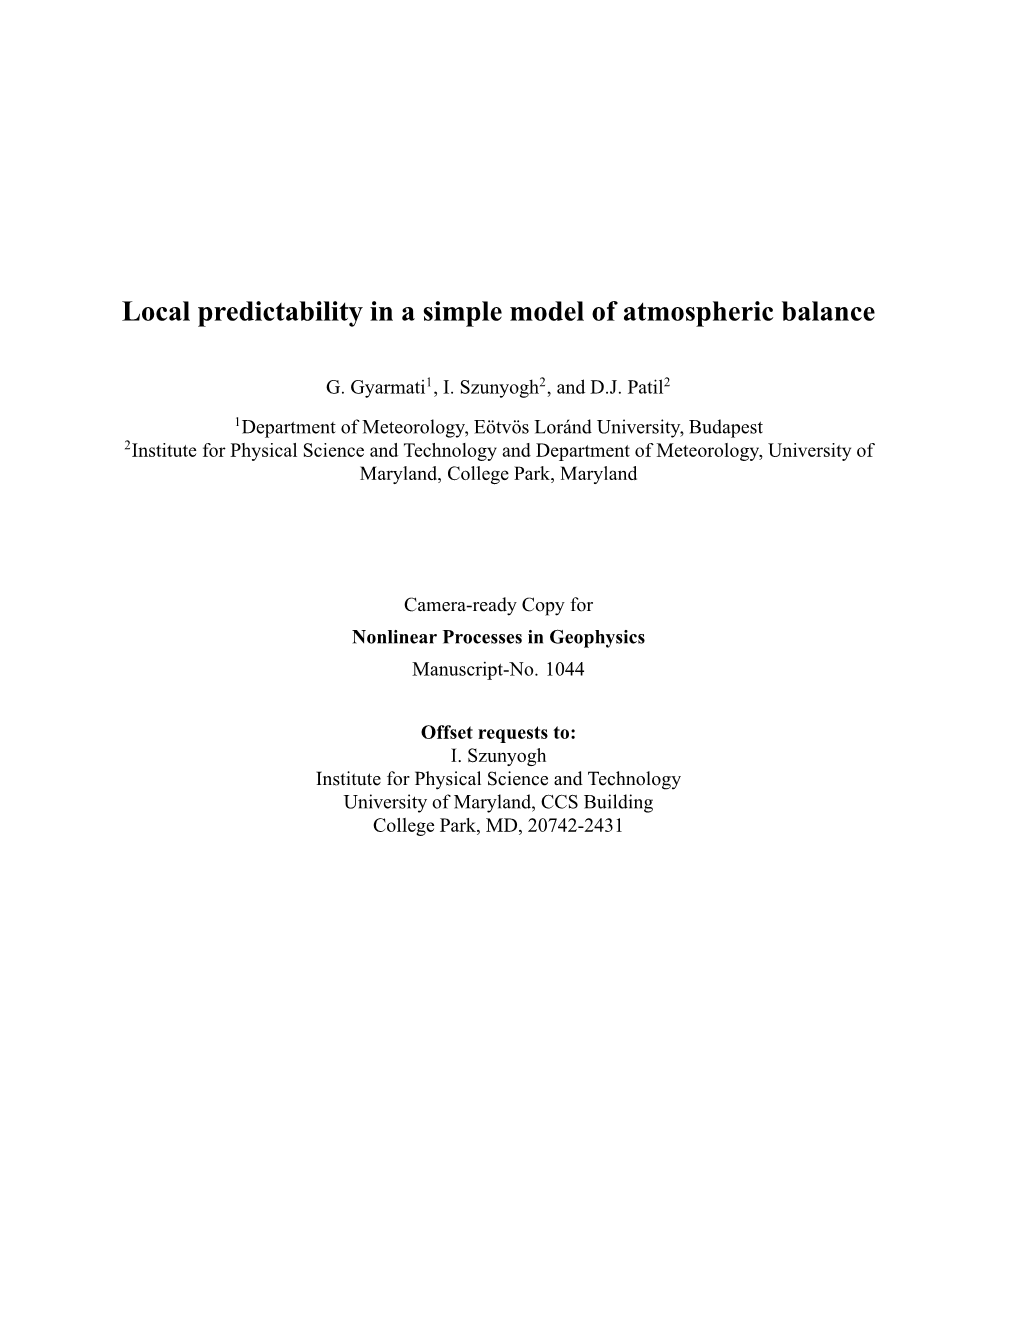 Local Predictability in a Simple Model of Atmospheric Balance